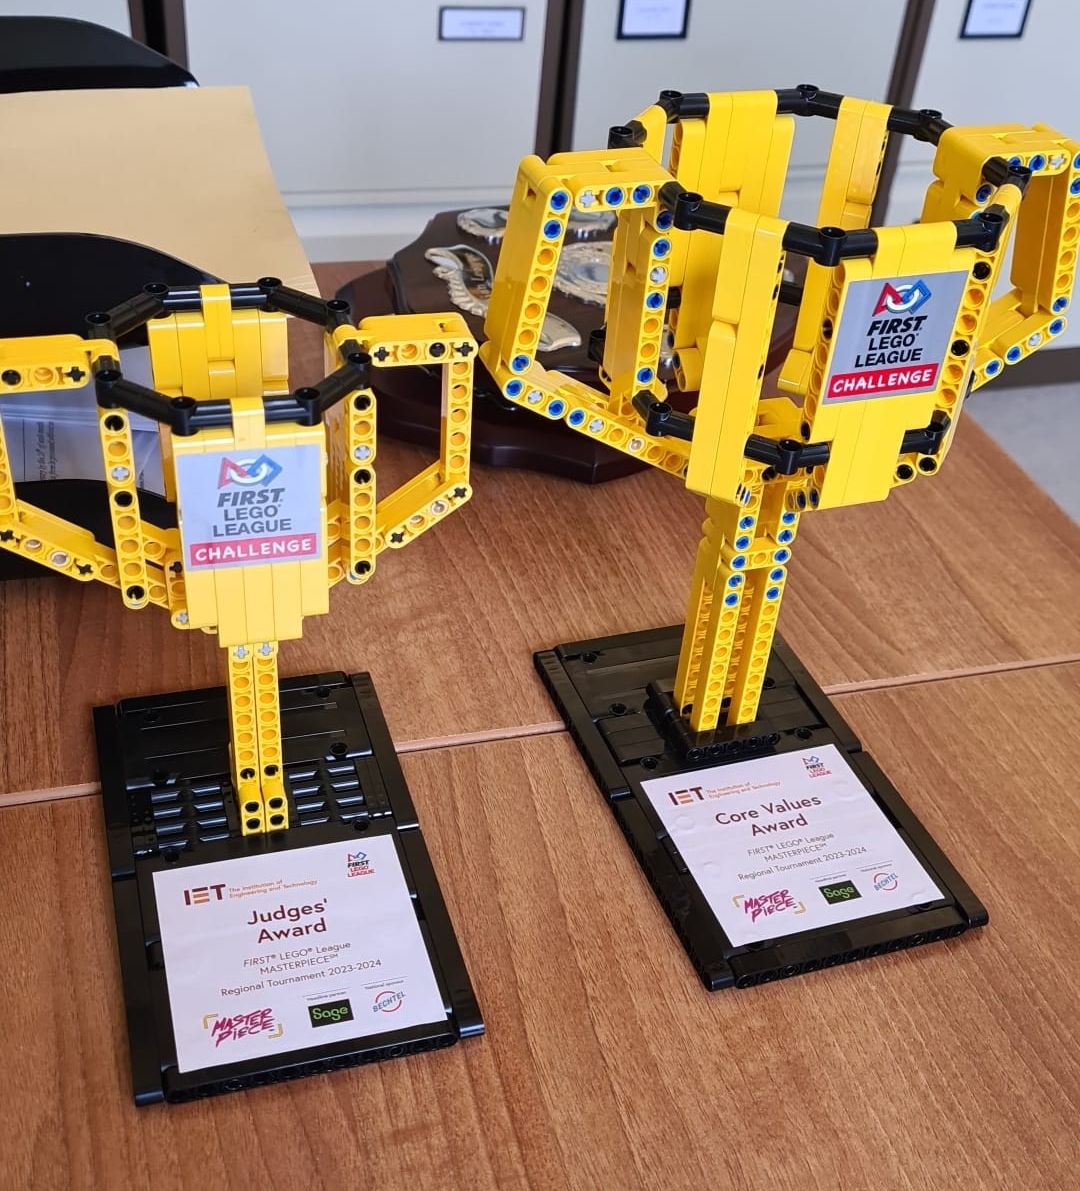 Two teams from Years 7 & 9 travelled to GoTech to take part in a regional Lego Robotics competition. Team 1 - The Luminaries won the Judges' Rising Stars award and Team 2 - the LEGOphants won the trophy for core values. Well done everyone! Read more: shorturl.at/juwH5